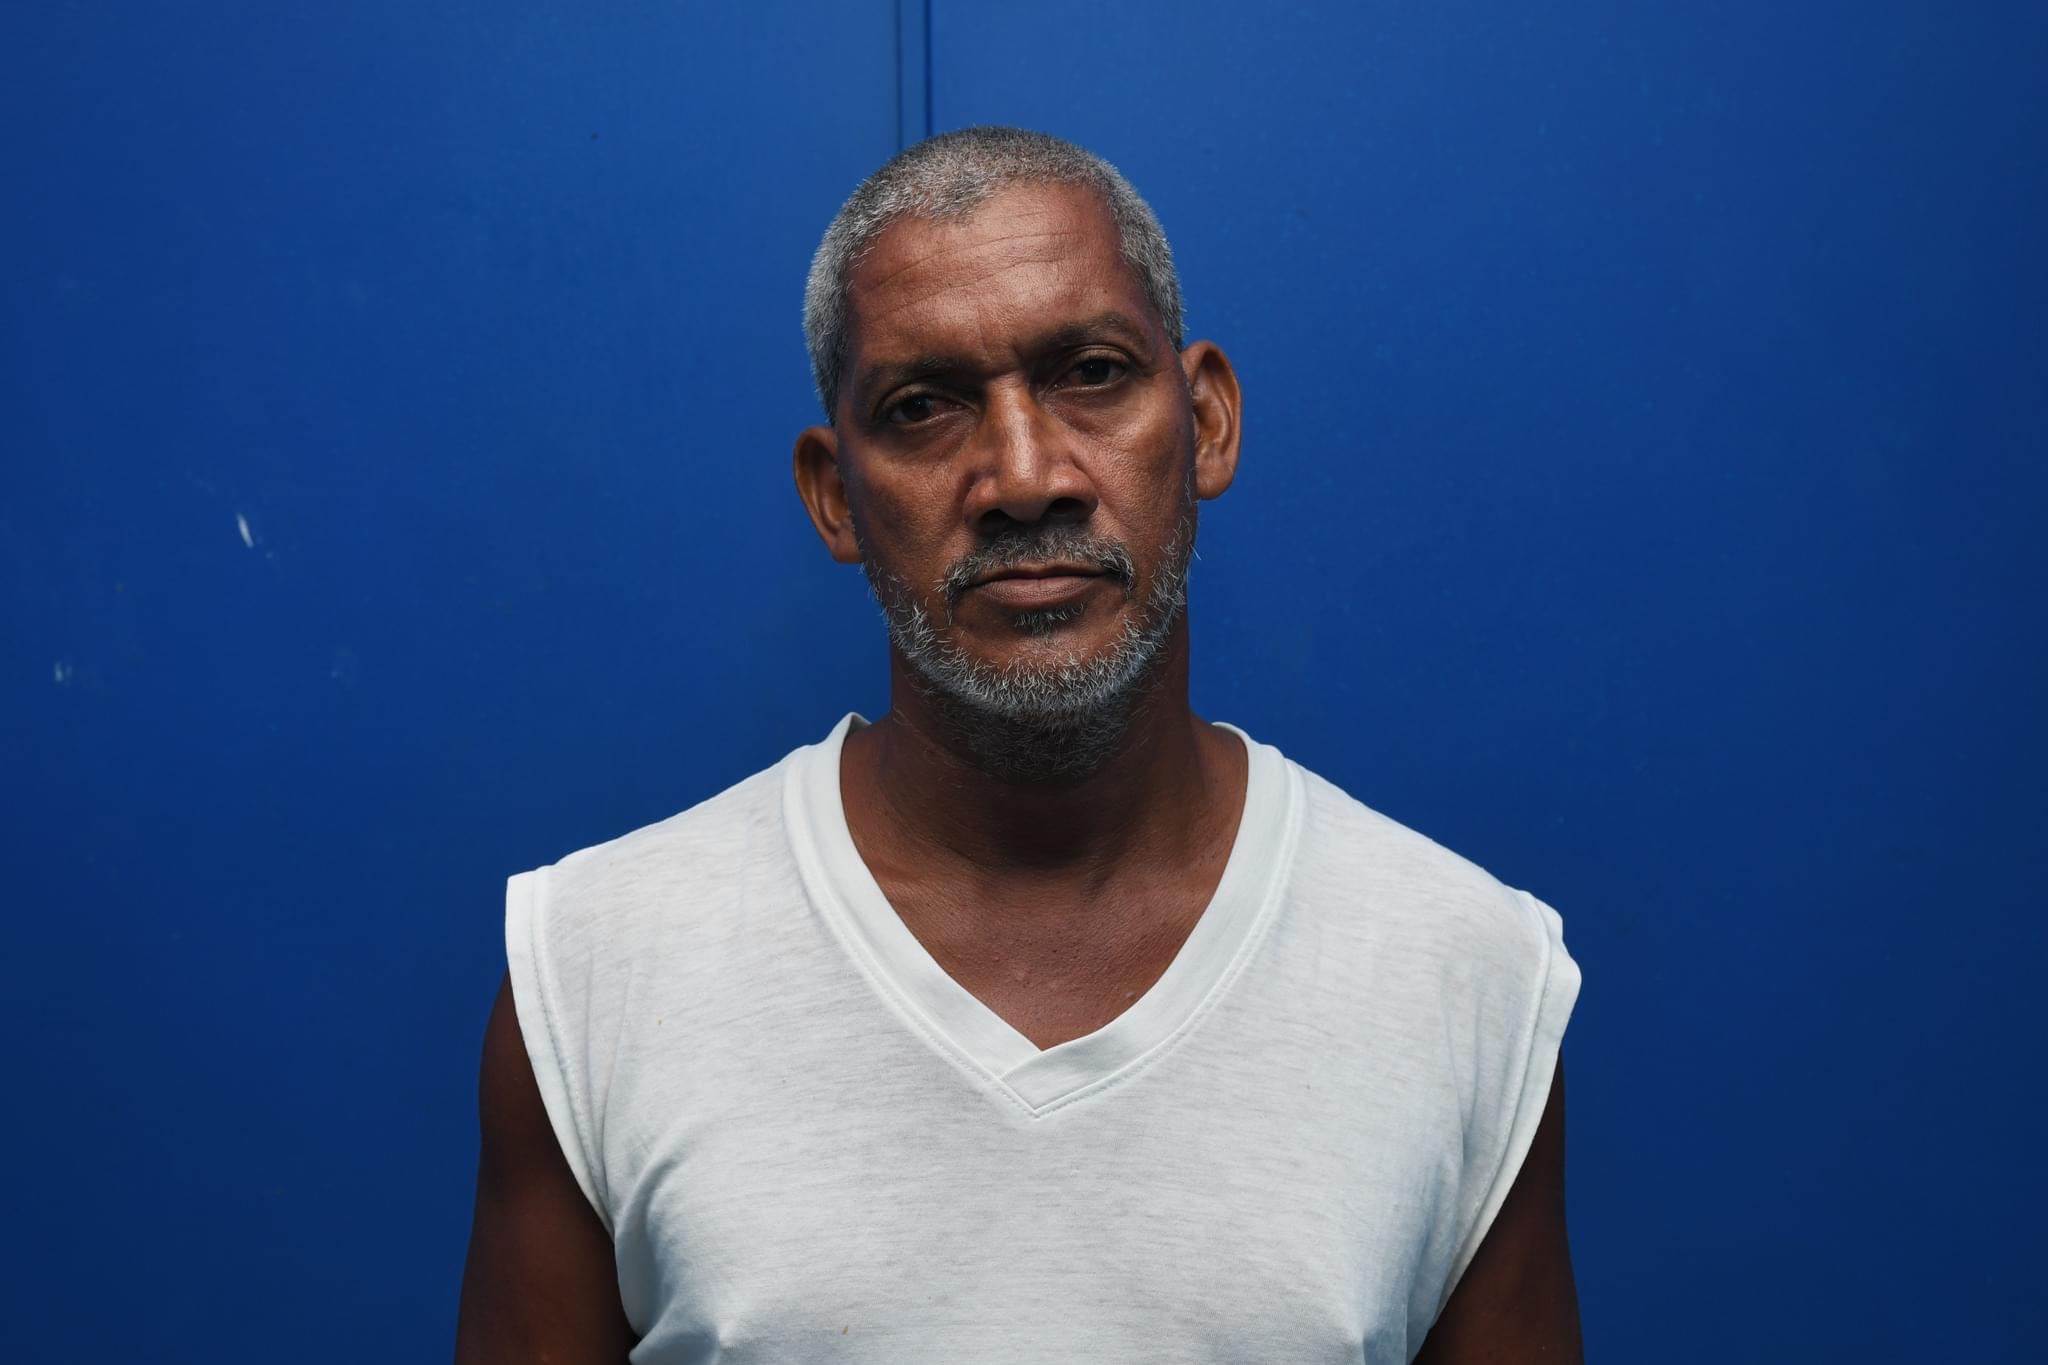 Six men held for illegal gambling and smoking cannabis in PoS